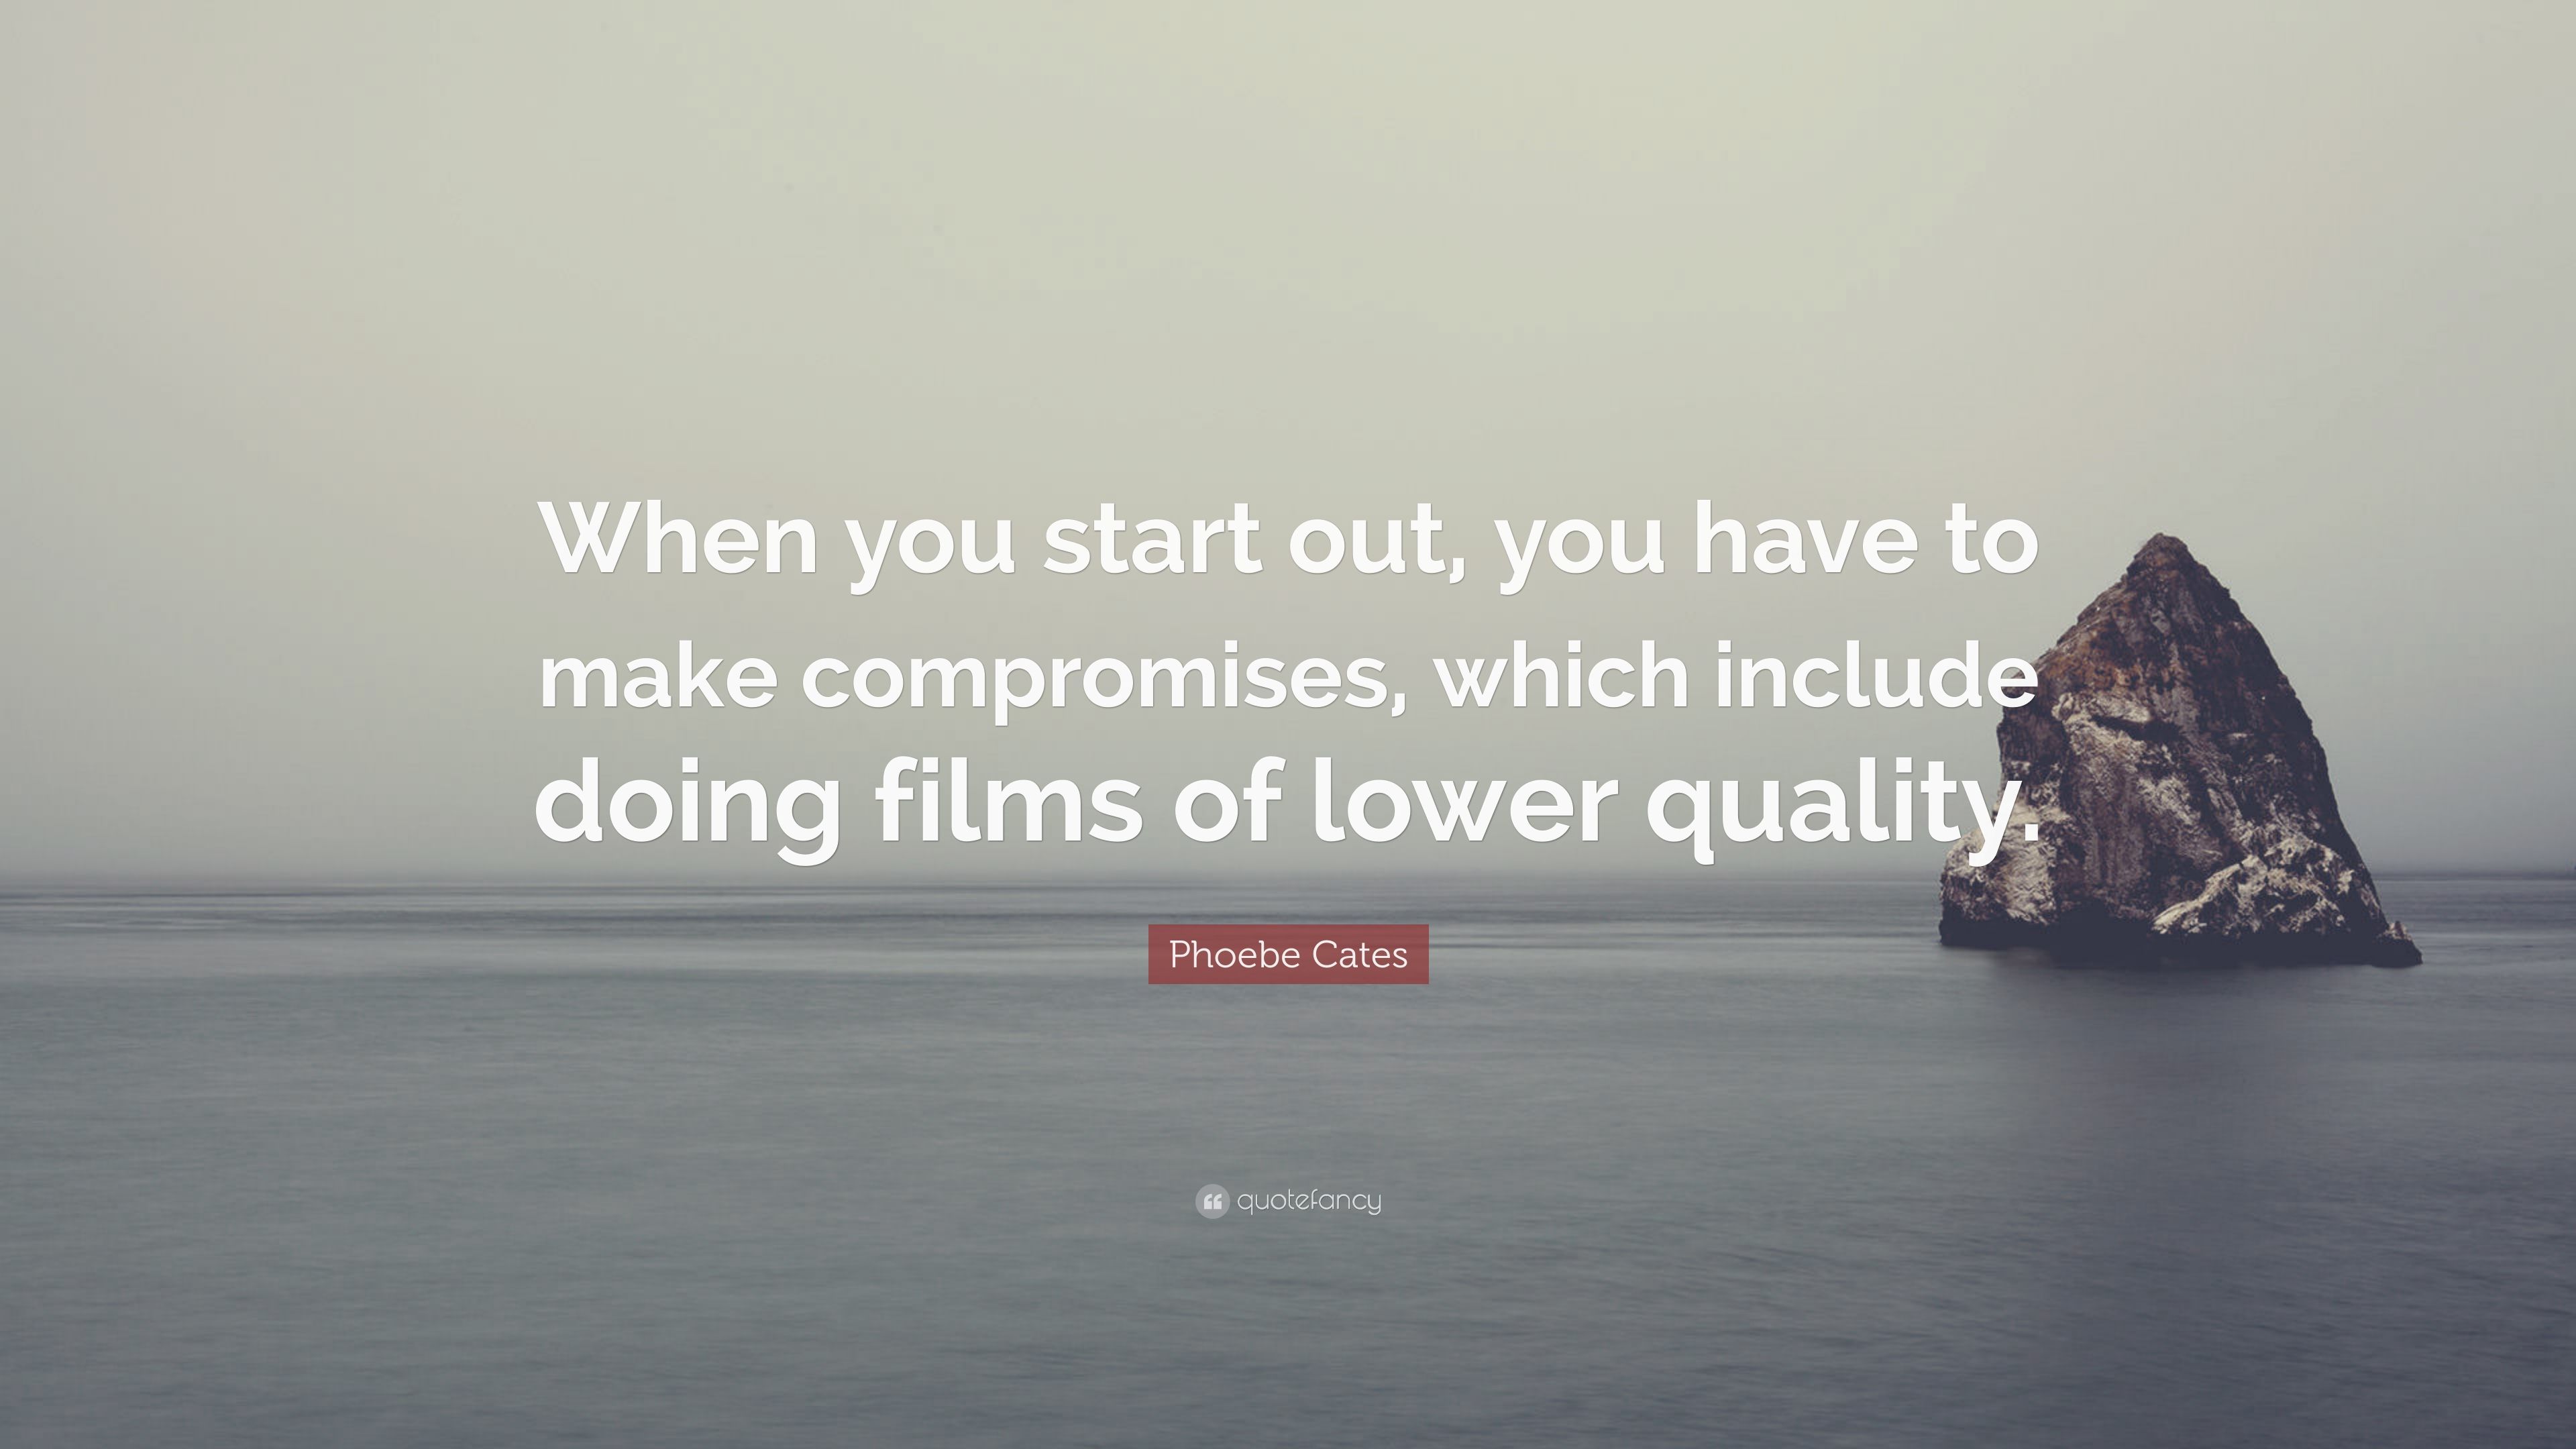 Phoebe Cates Quote: "When you start out, you have to make compromises,...